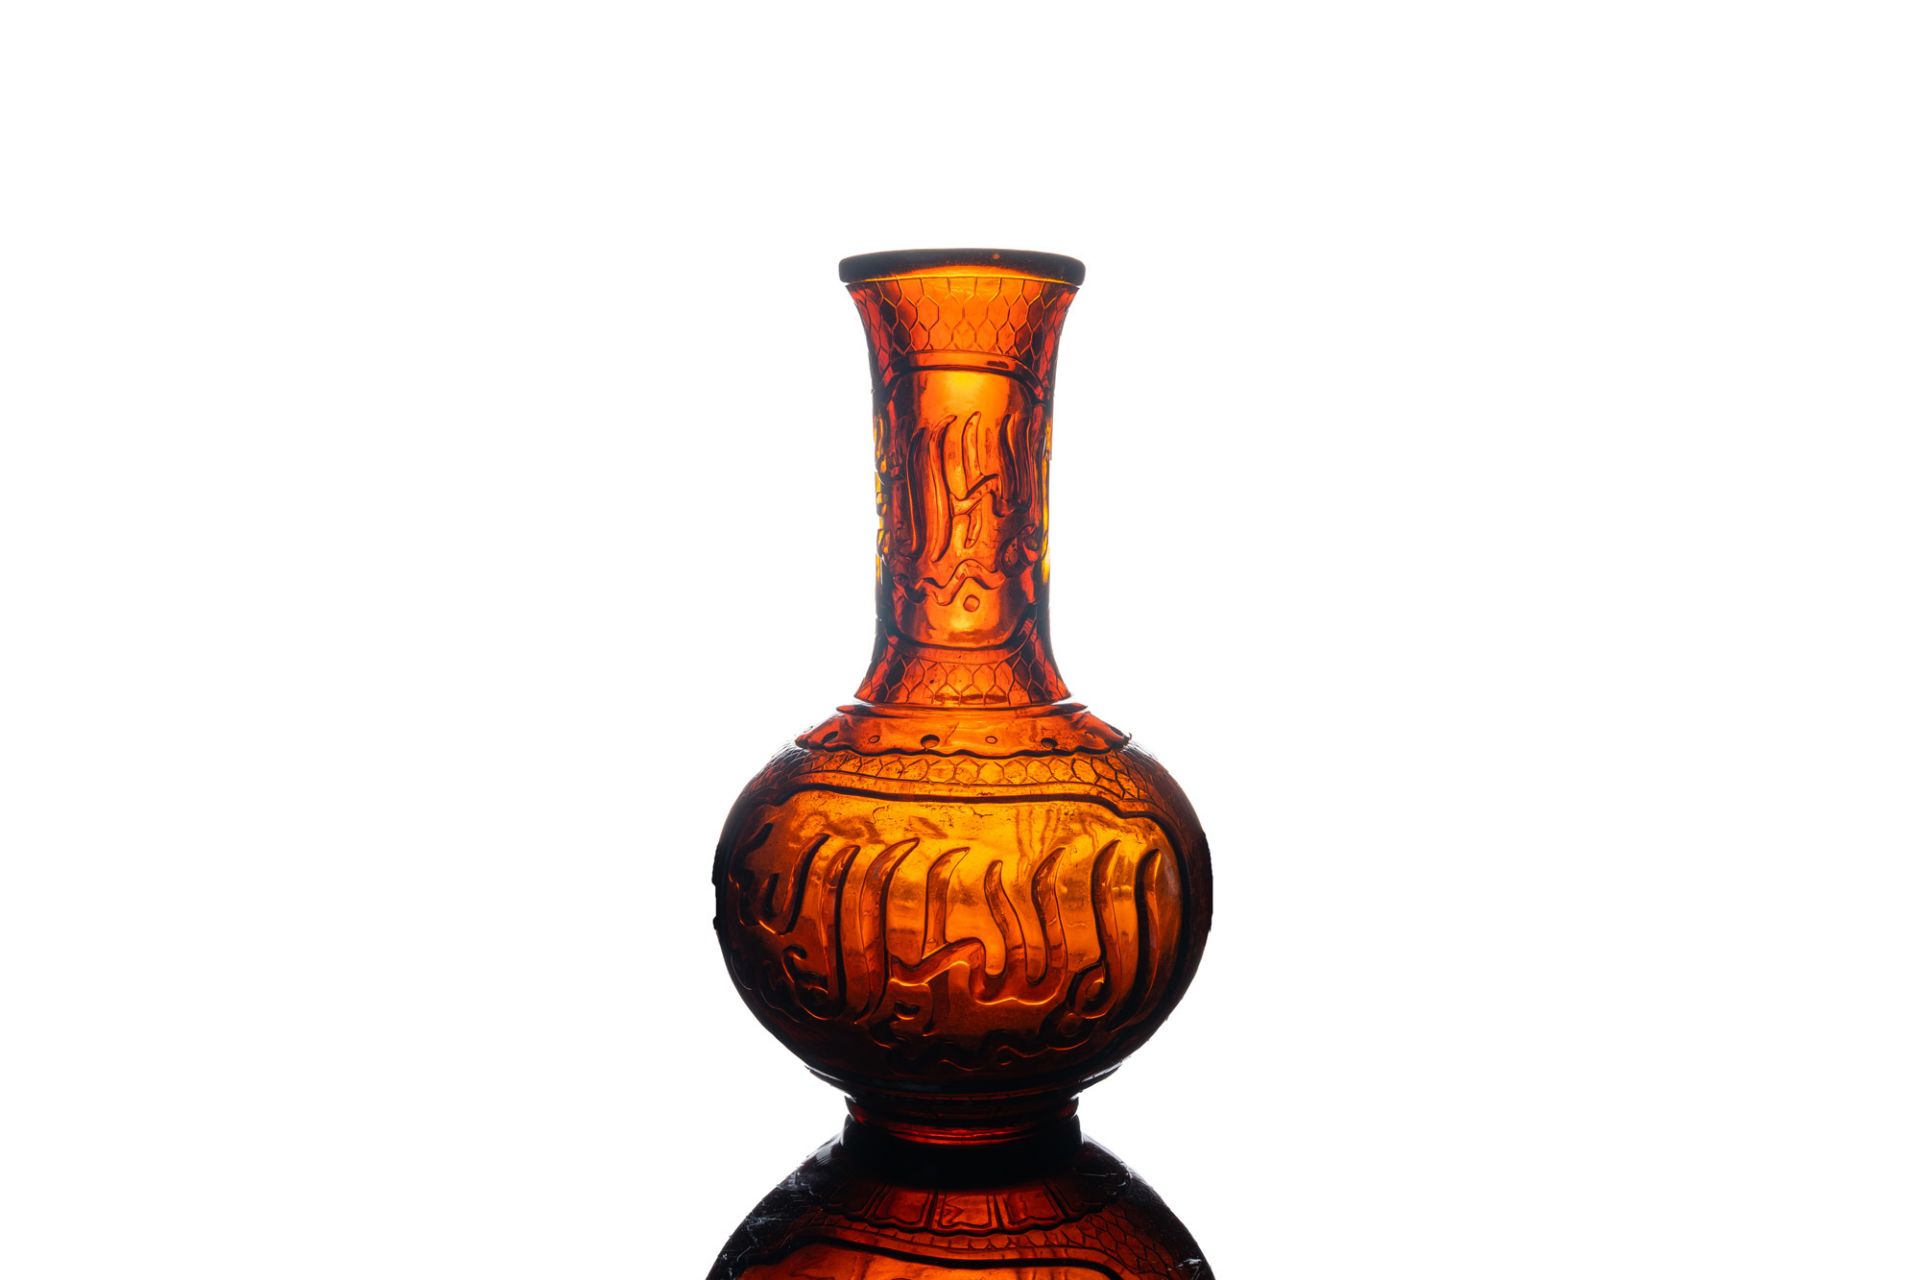 A Chinese Islamic market Beijing glass vase inscribed 'Allah' and 'Muhammad the Prophet', 18/19th C. - Image 3 of 10